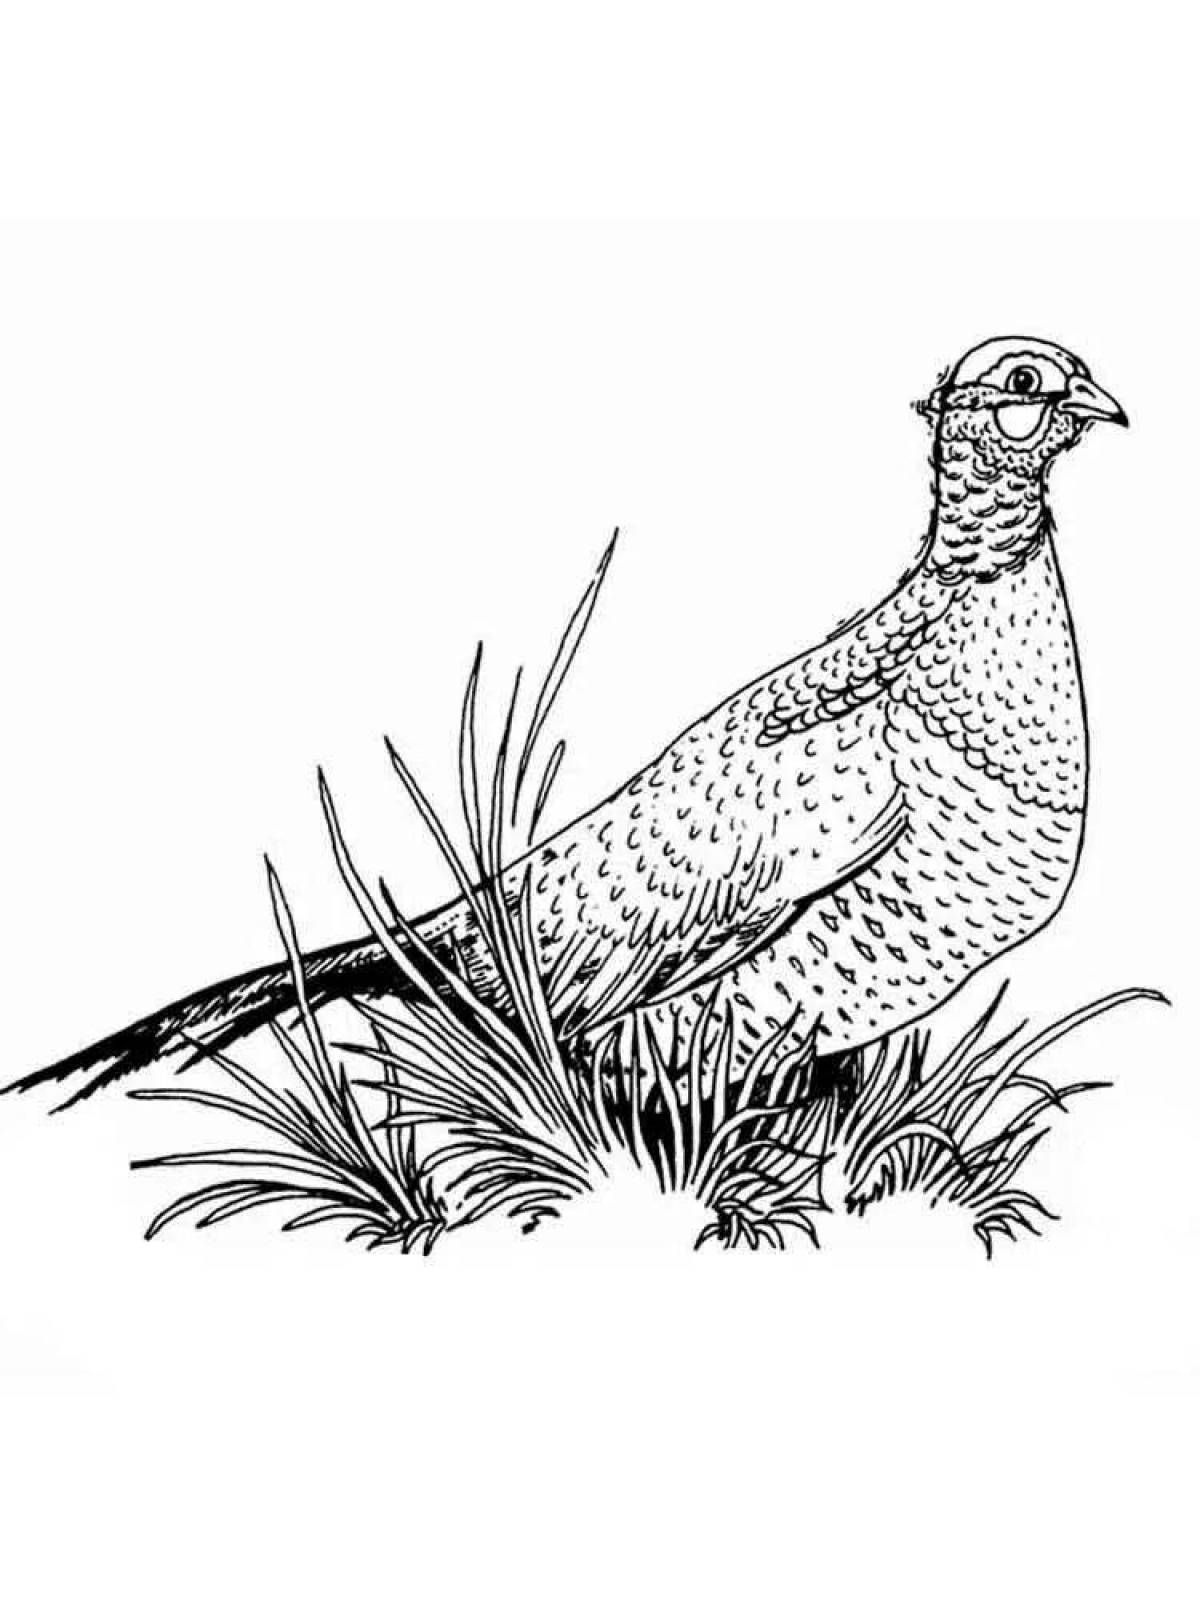 Charming pheasant coloring page